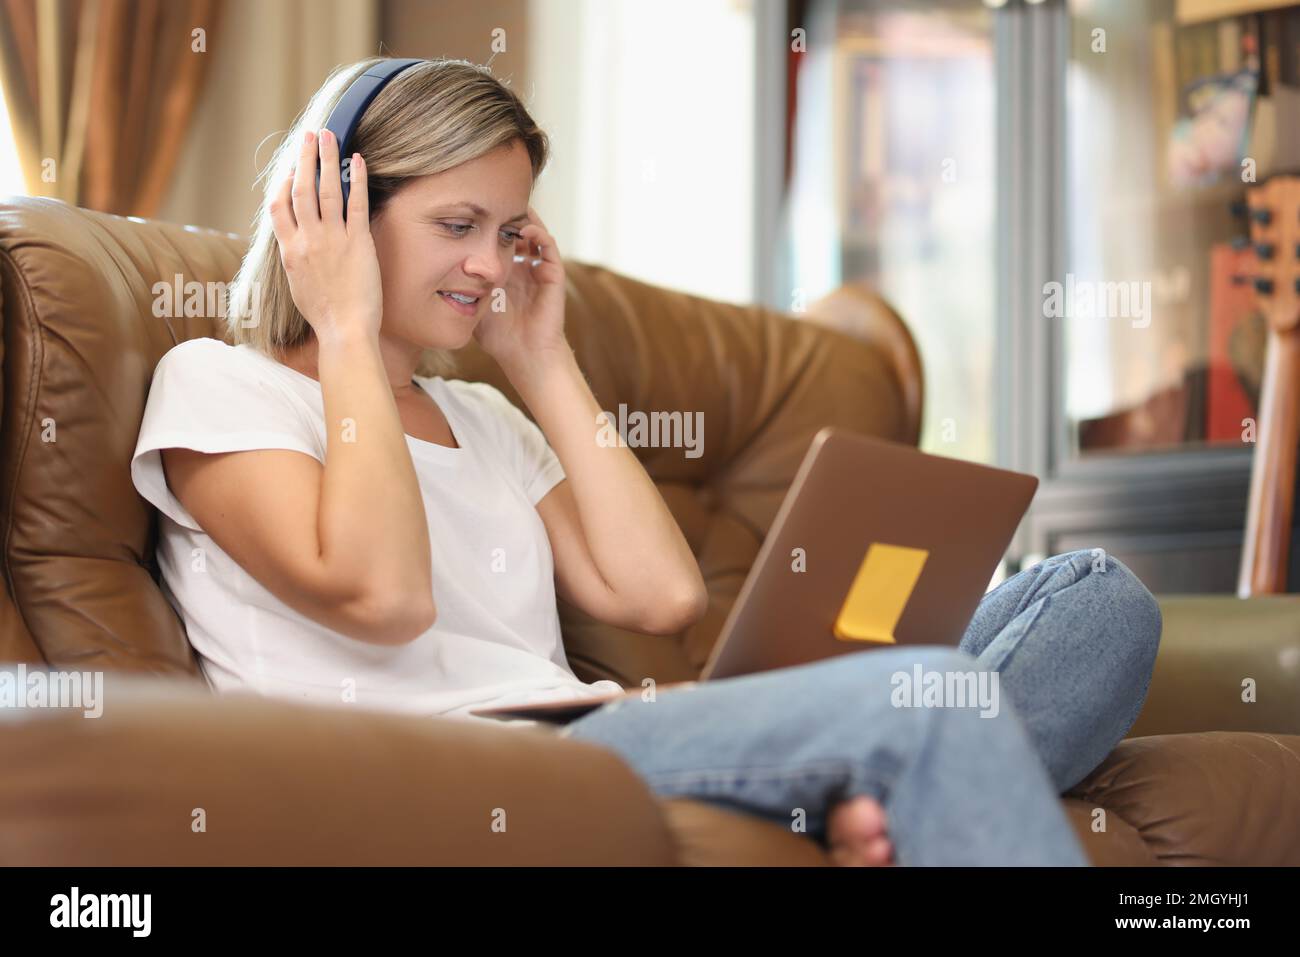 Smiling woman with wireless headphones and laptop sitting on sofa at home. Stock Photo